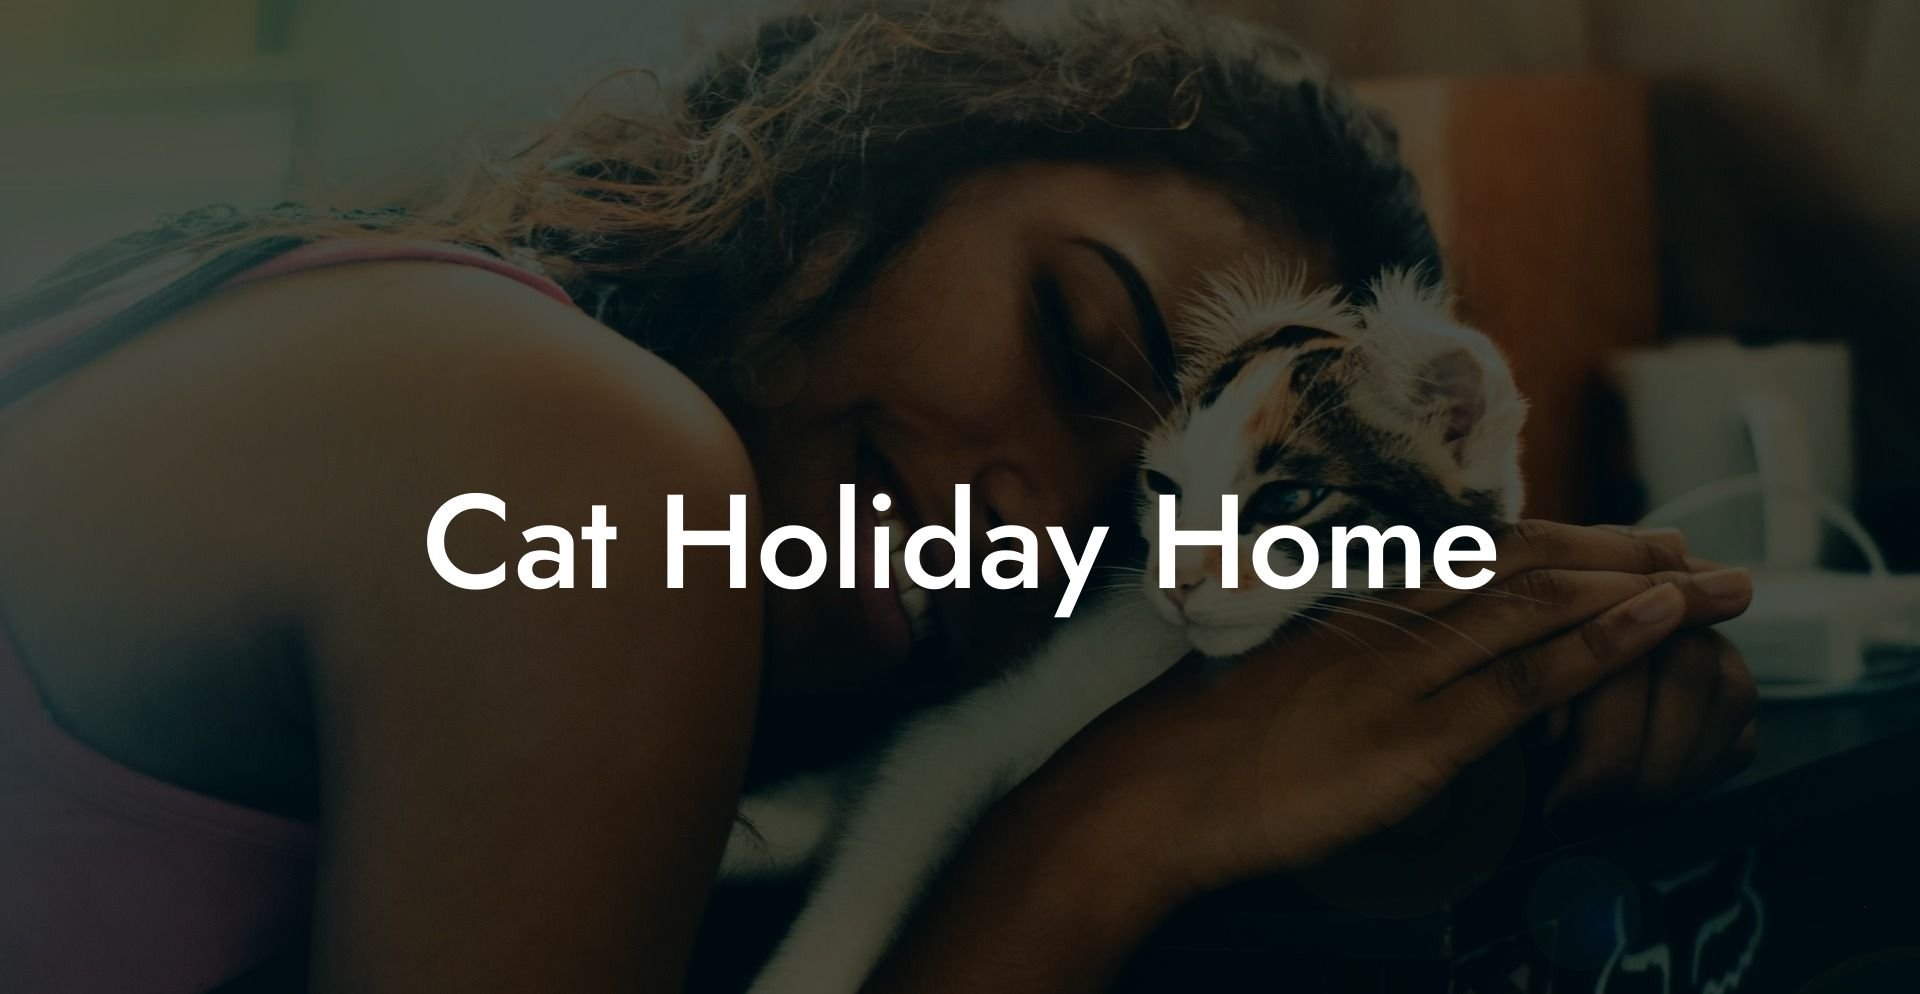 Cat Holiday Home